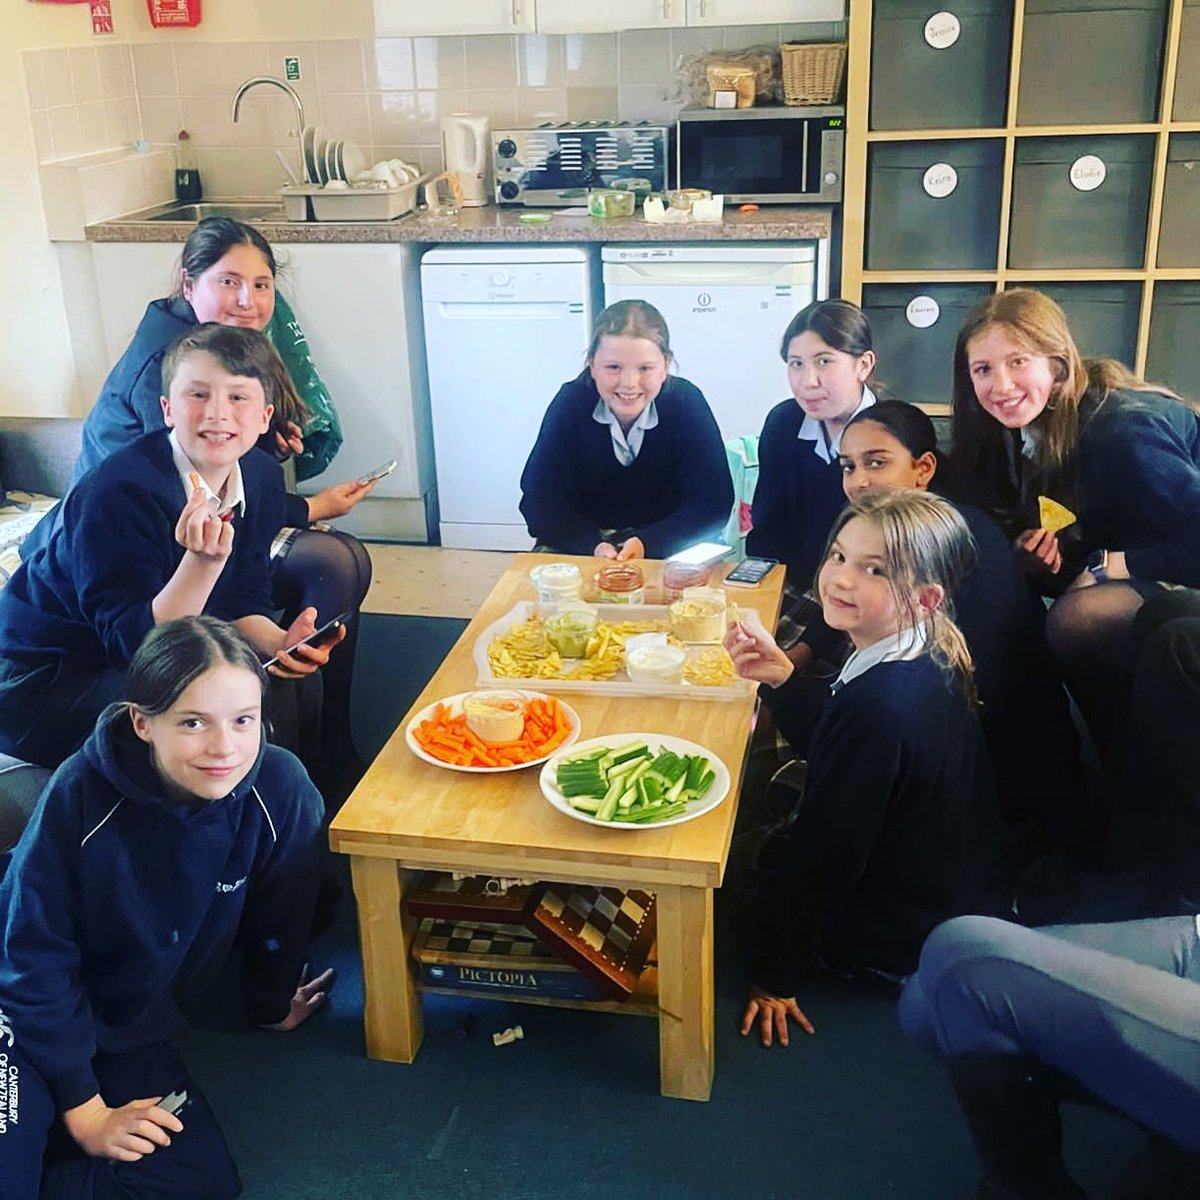 Our boarders caught up with friends over some Veggies, crisps, and dip last night. 
Noting better! ❤️ 
#friendship #boardinglife